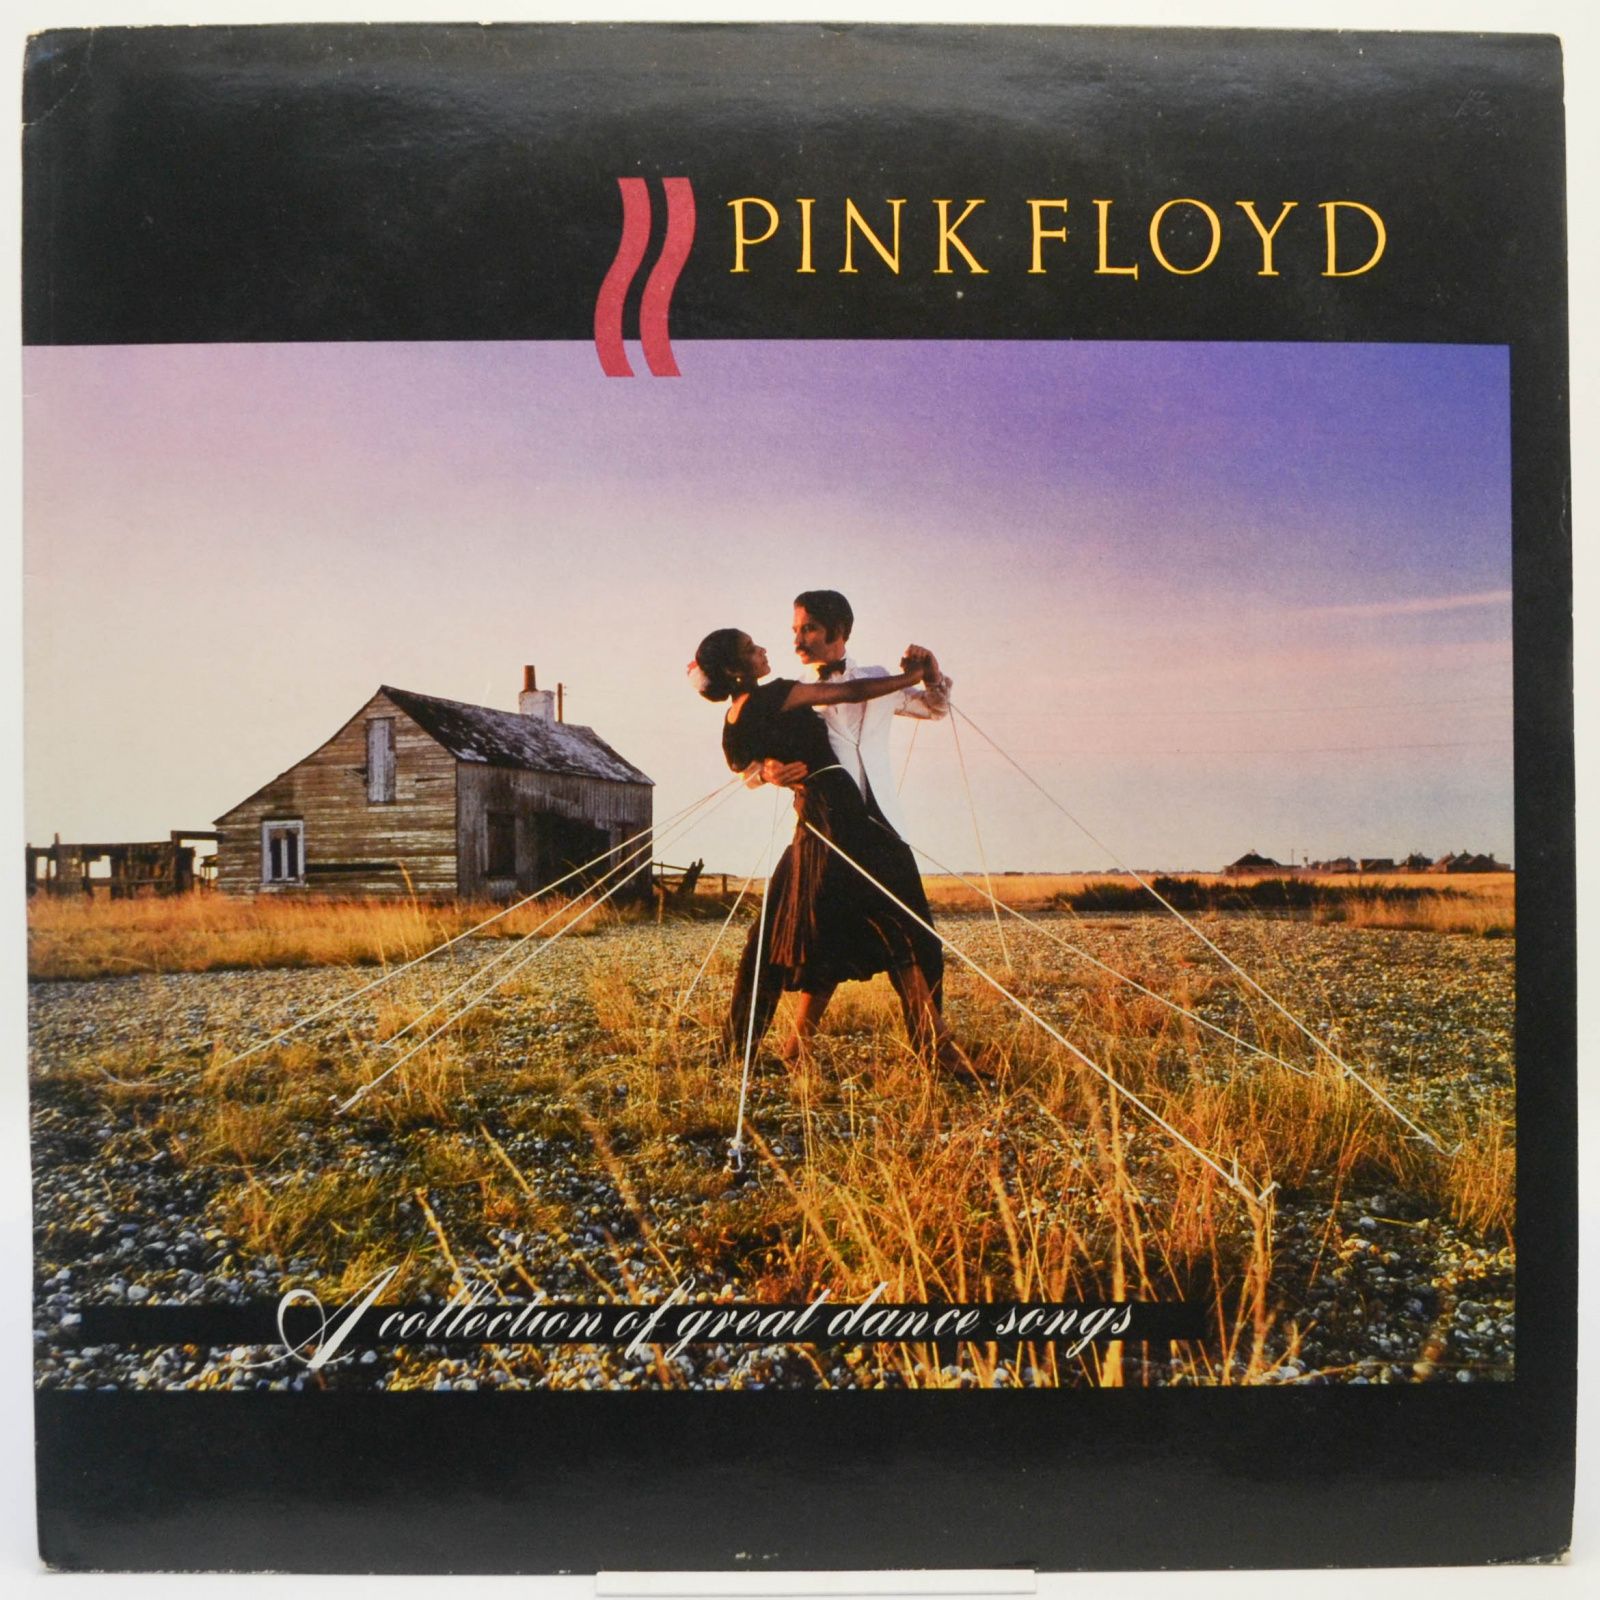 Pink Floyd — A Collection Of Great Dance Songs (1-st, UK), 1981